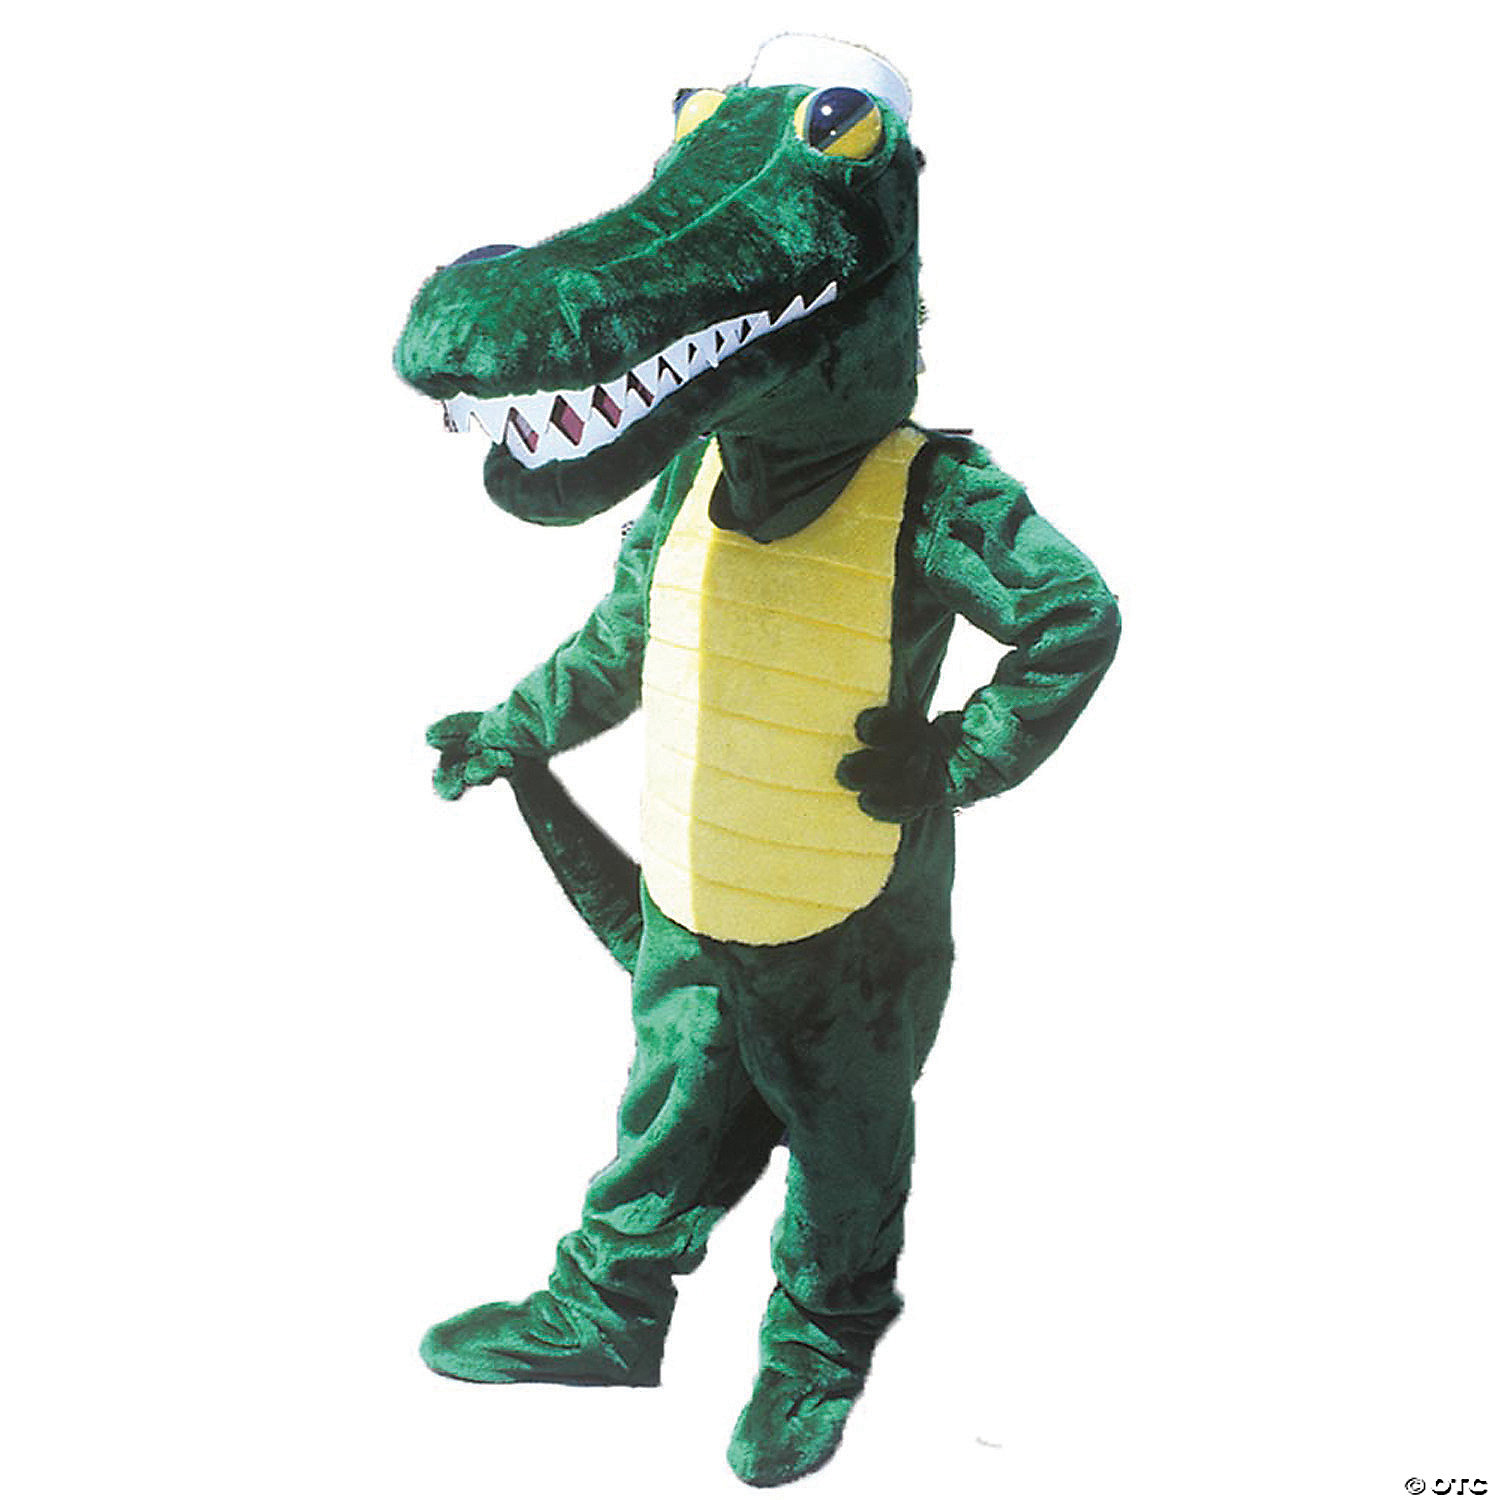 GATOR  AS PICTURED - HALLOWEEN